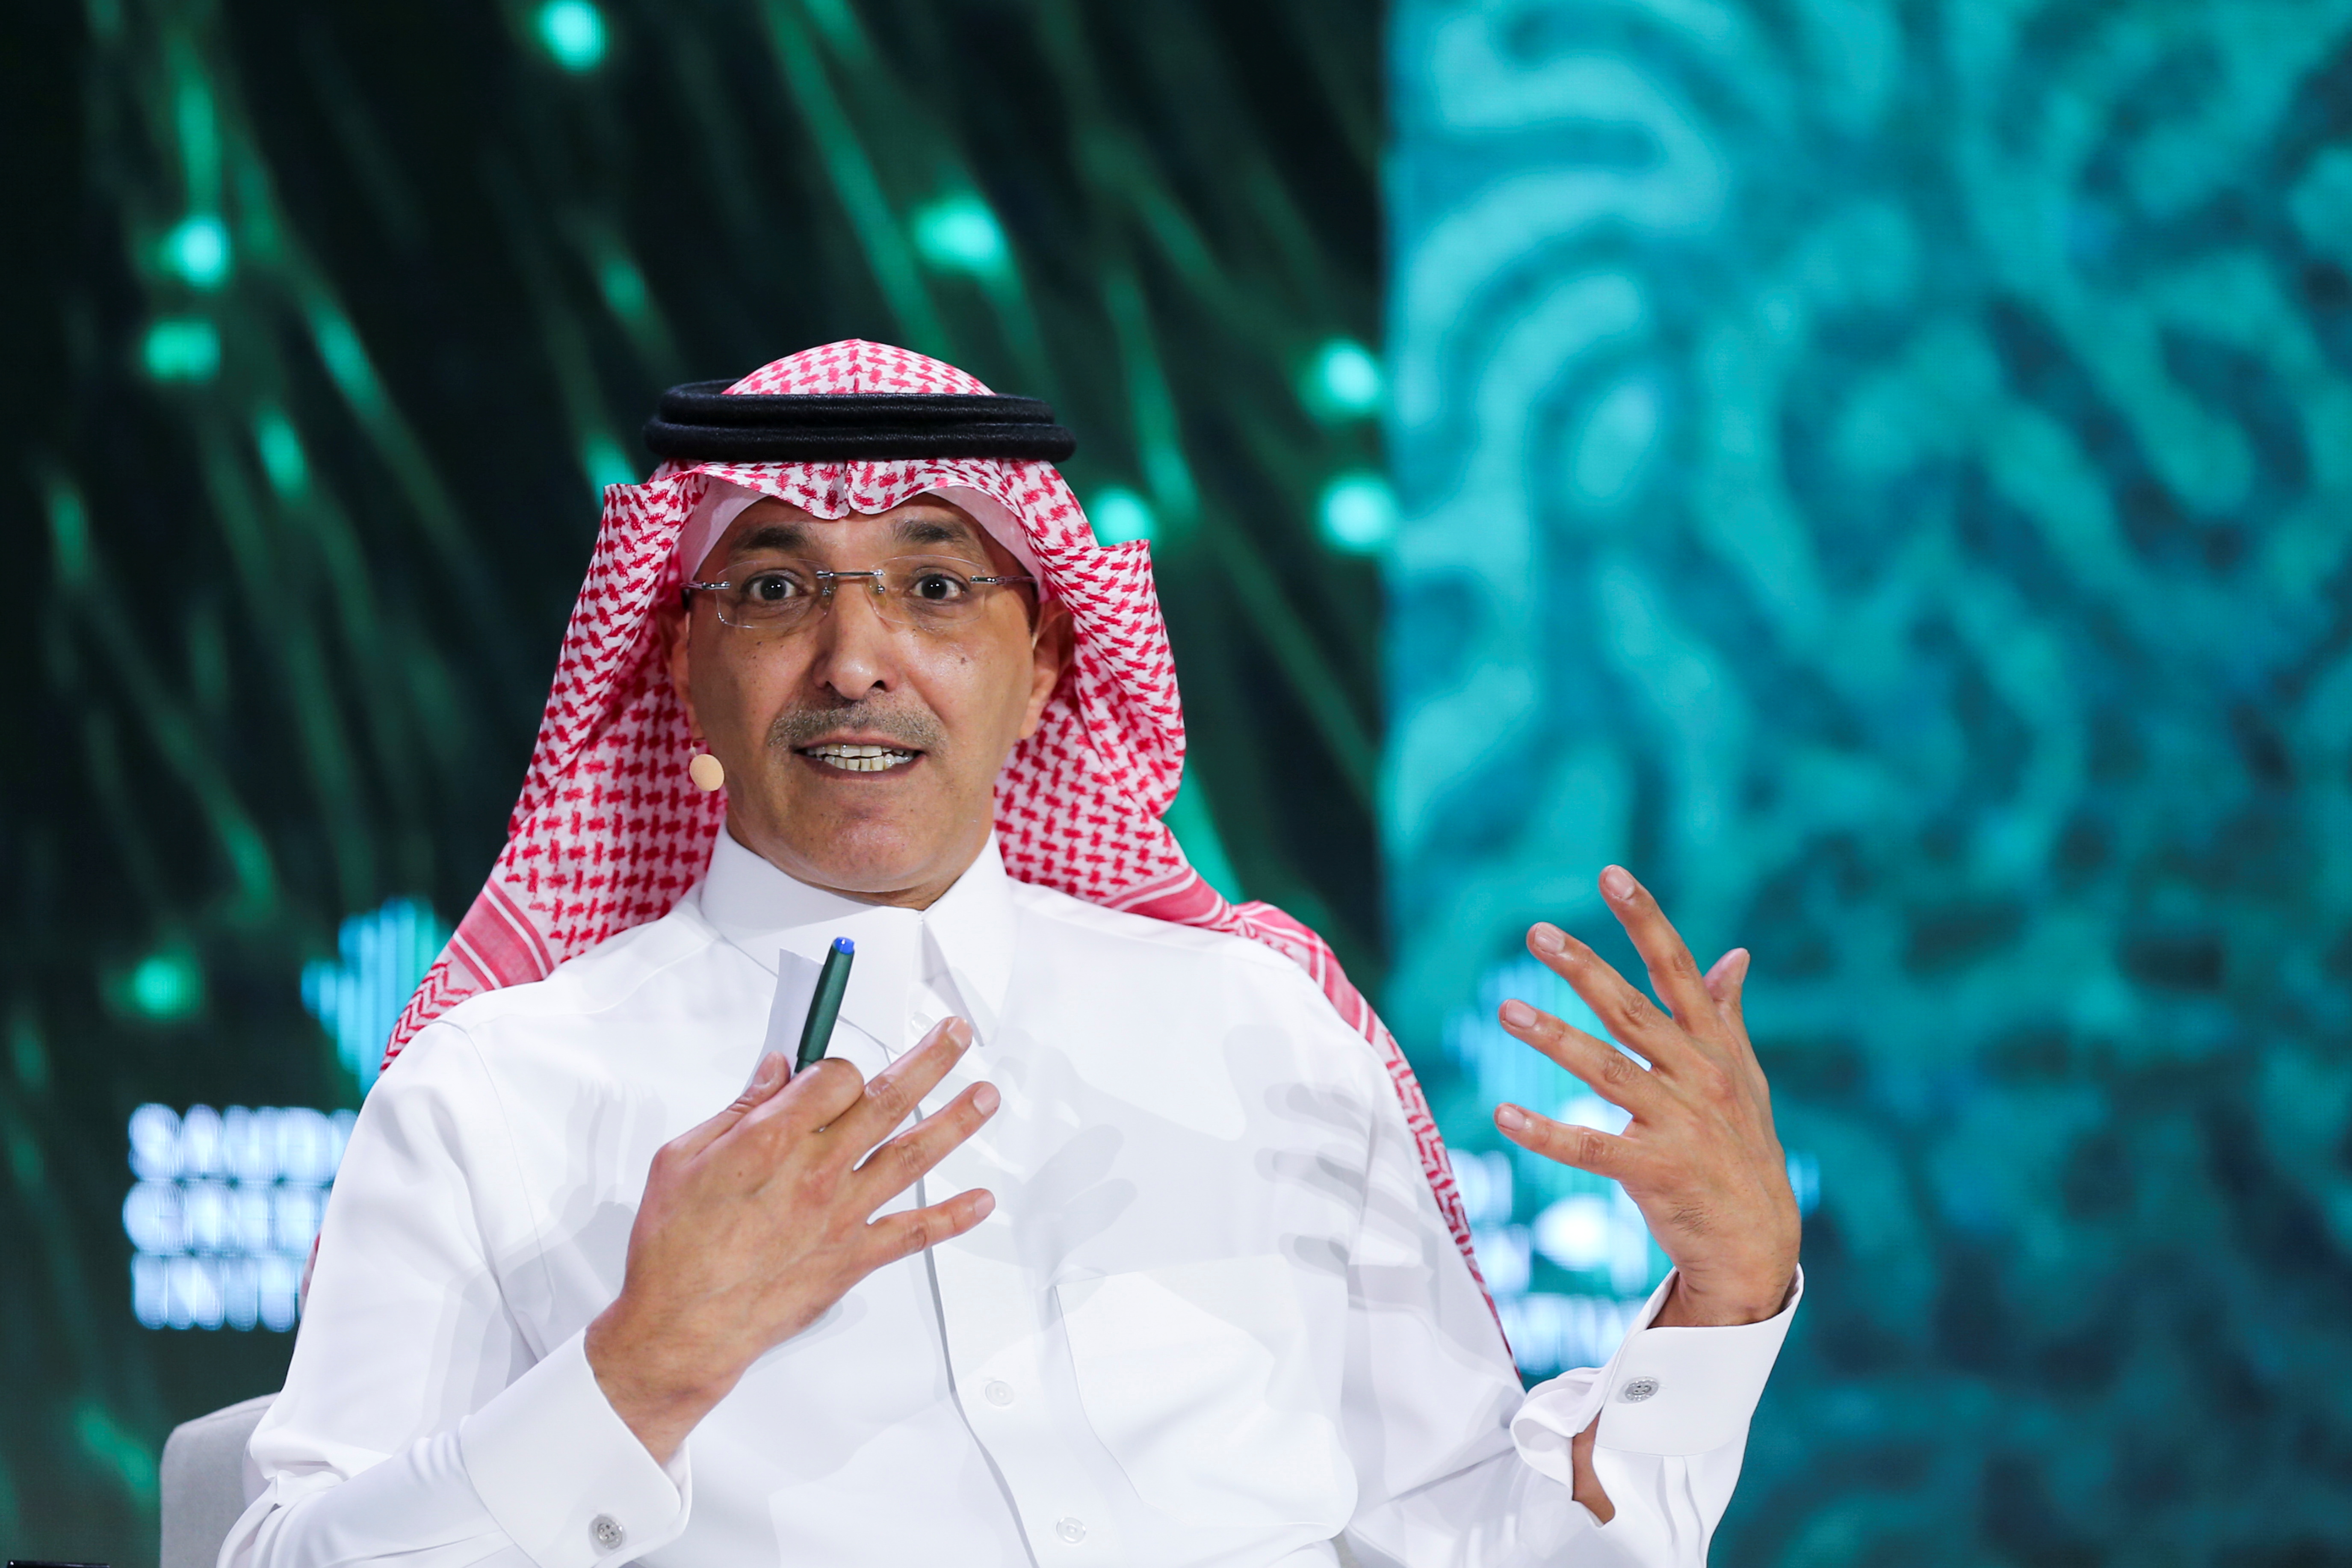 Saudi Minister of Finance Mohammed al-Jadaan gestures as he speaks during the Saudi Green Initiative Forum to discuss efforts by the world's top oil exporter to tackle climate change in Riyadh, Saudi Arabia, October 23, 2021. REUTERS/Ahmed Yosri